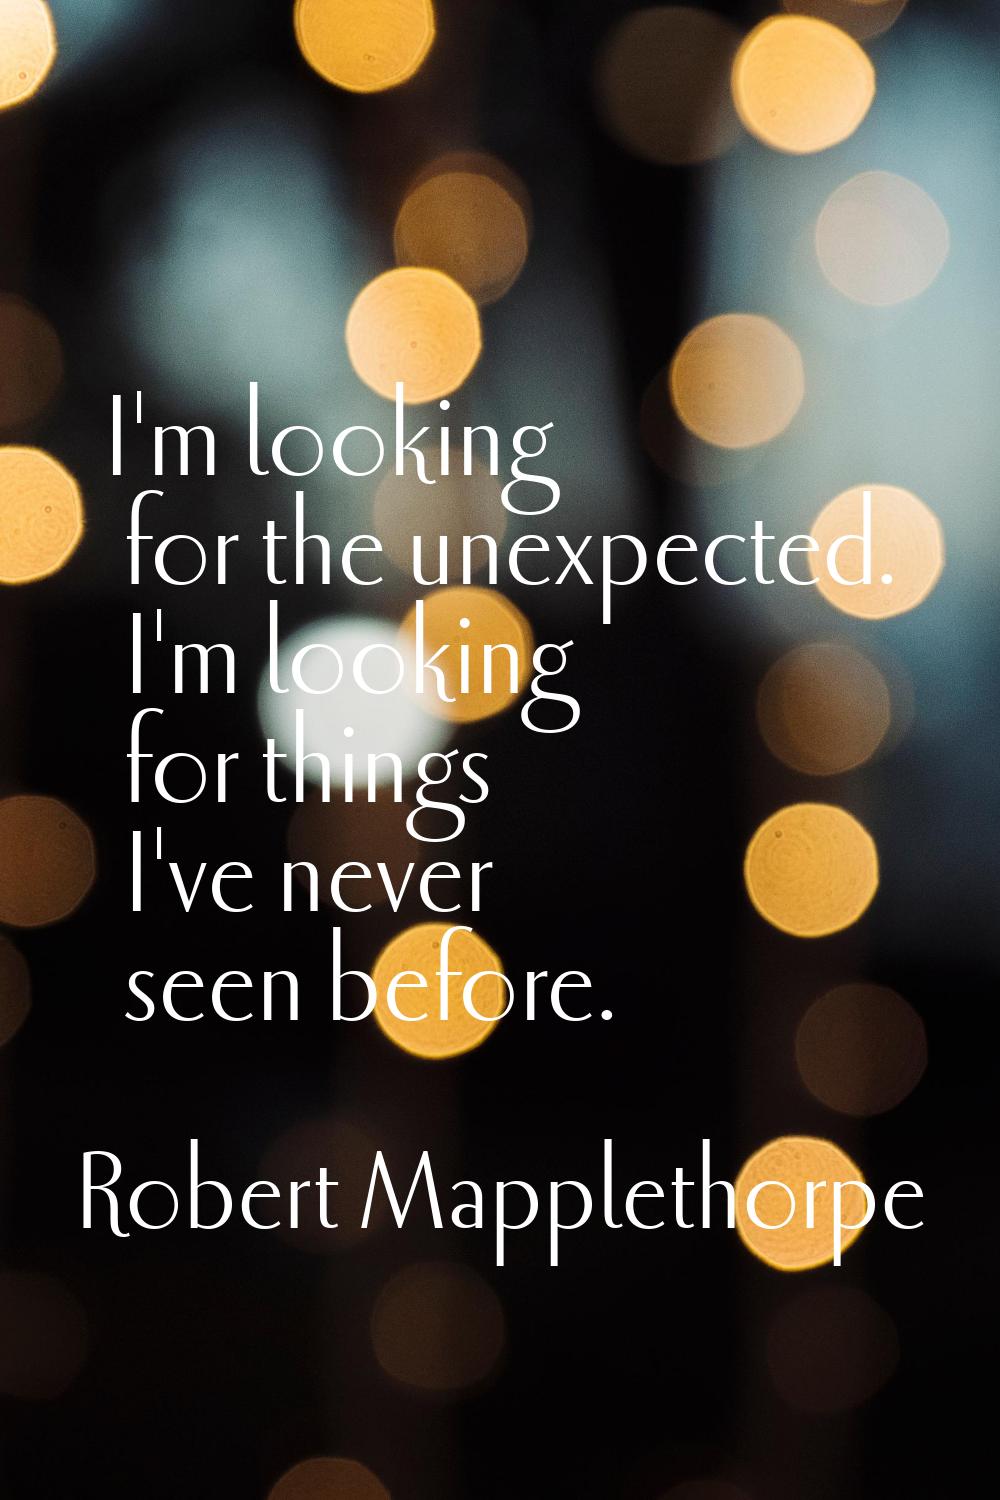 I'm looking for the unexpected. I'm looking for things I've never seen before.